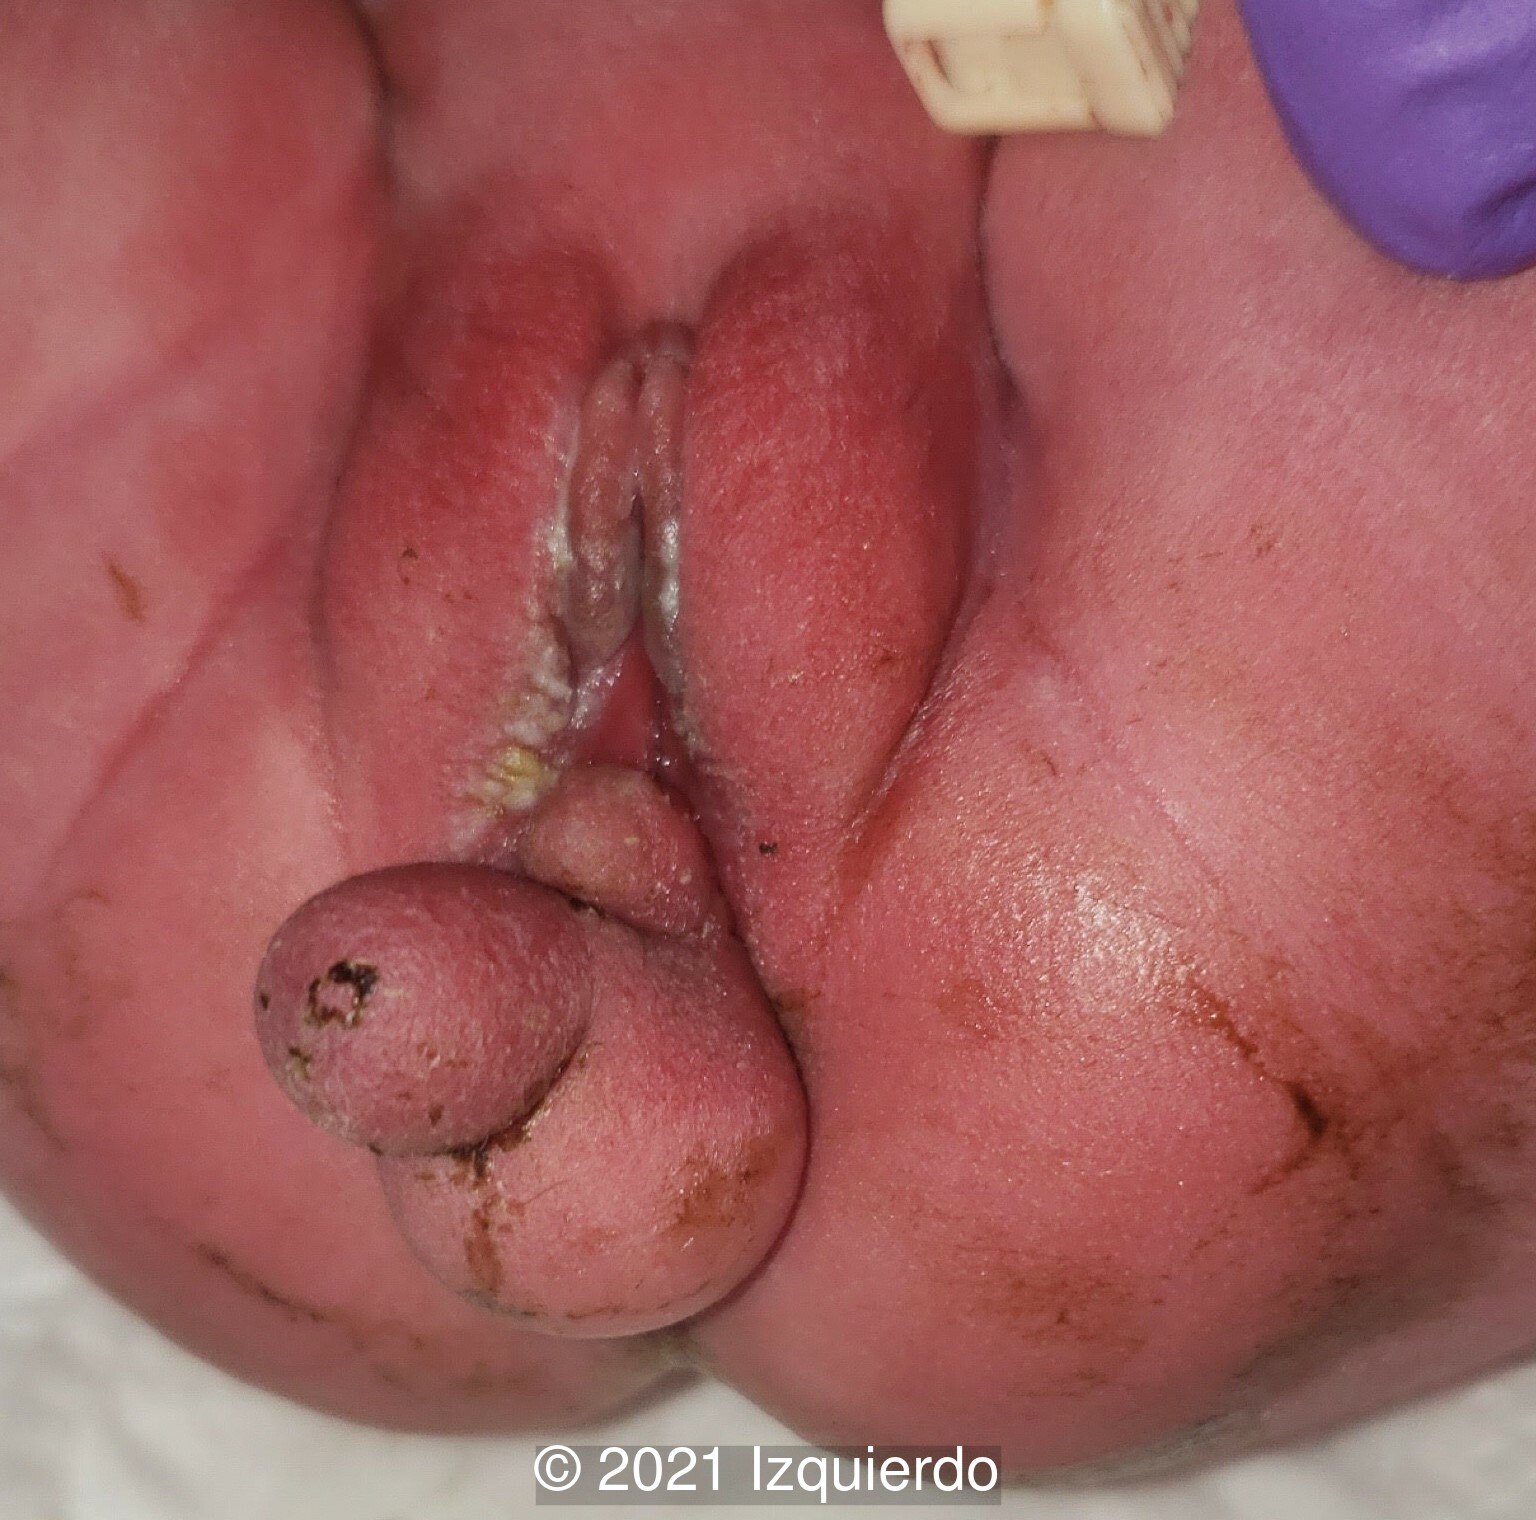 Pre-operative image of the perineal mass.